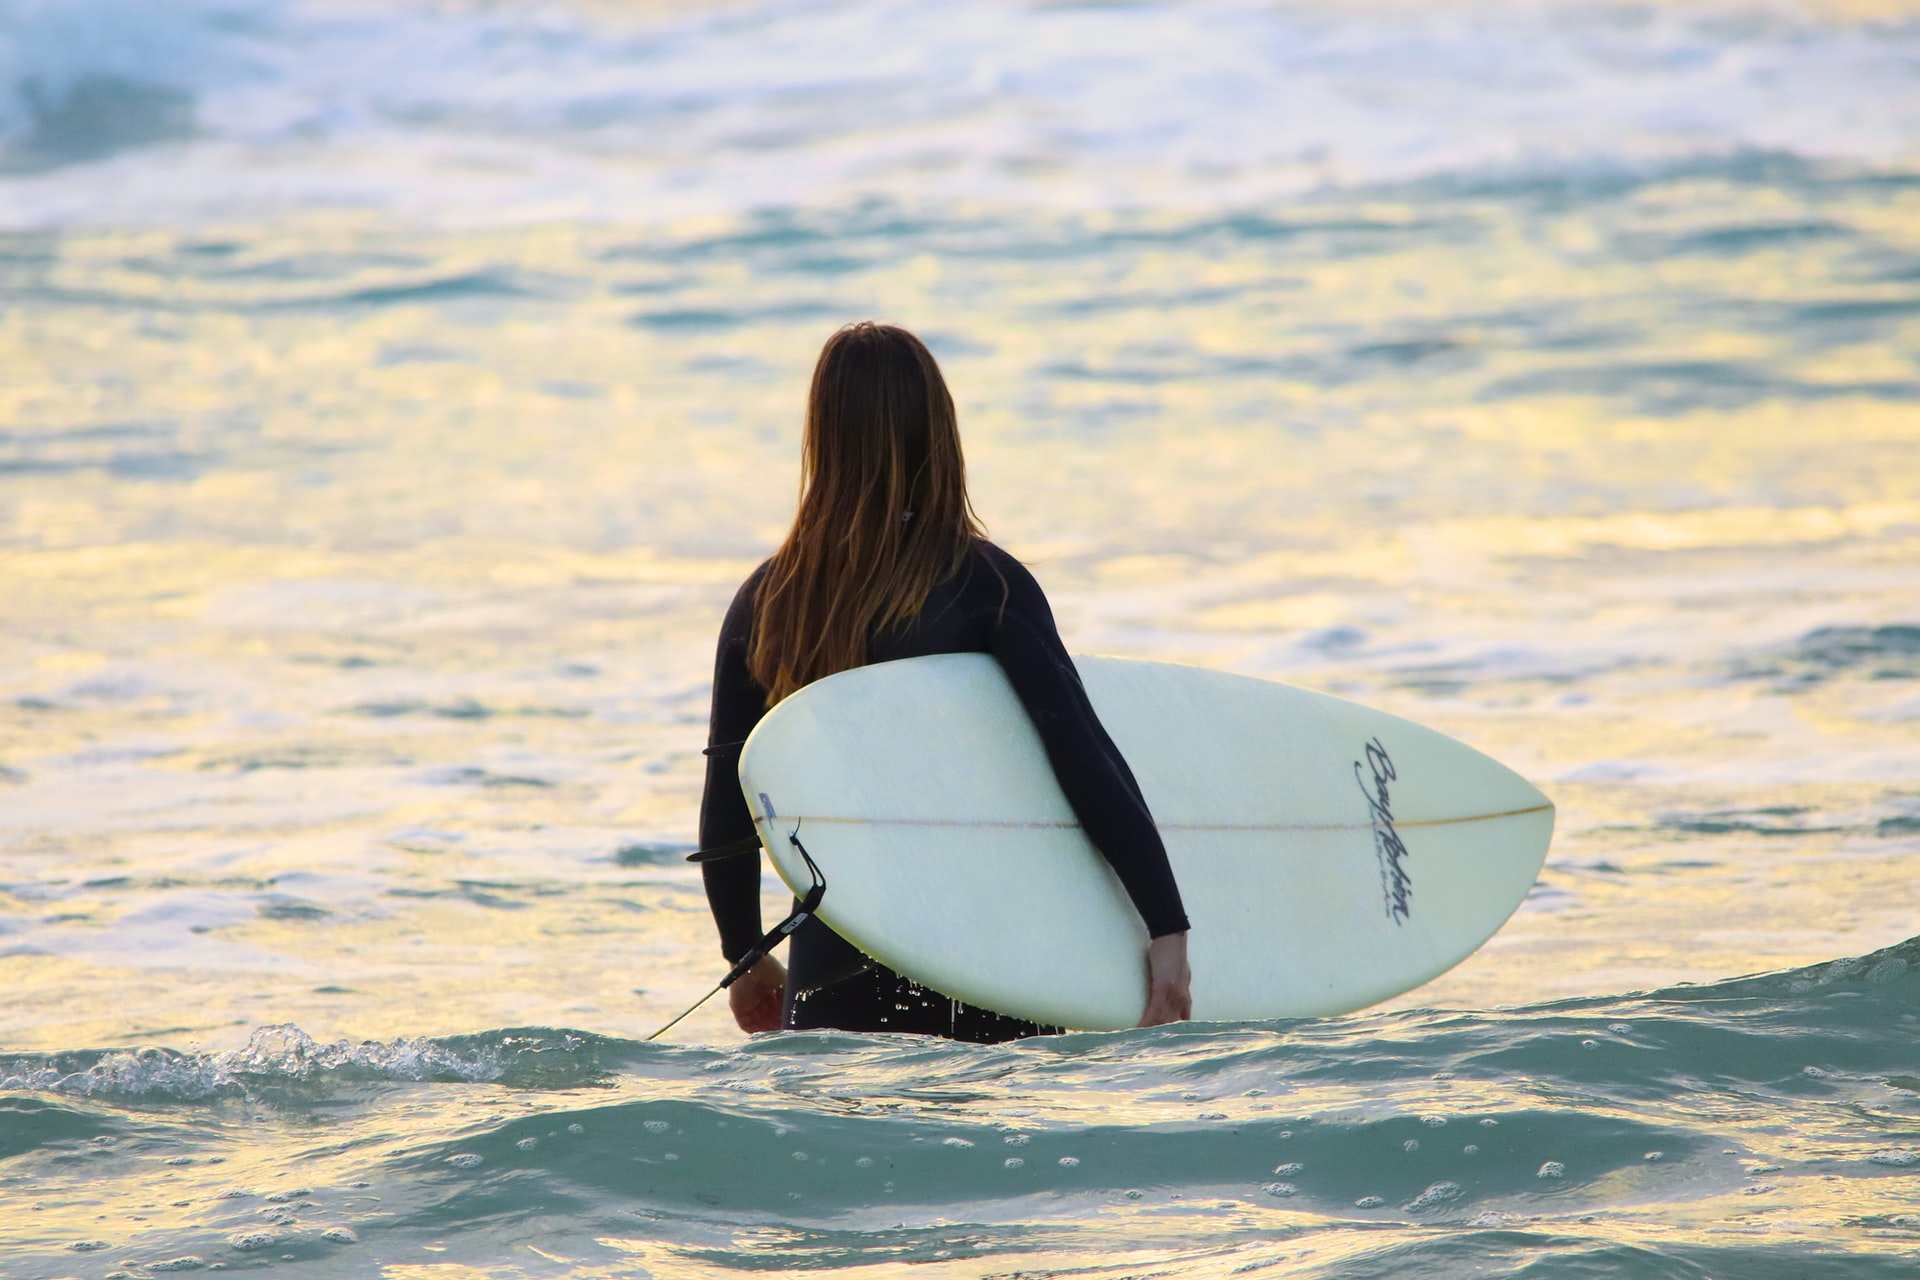 Do Surfers Hate Beginners? 14 Things to Avoid (to Not Be Hated)